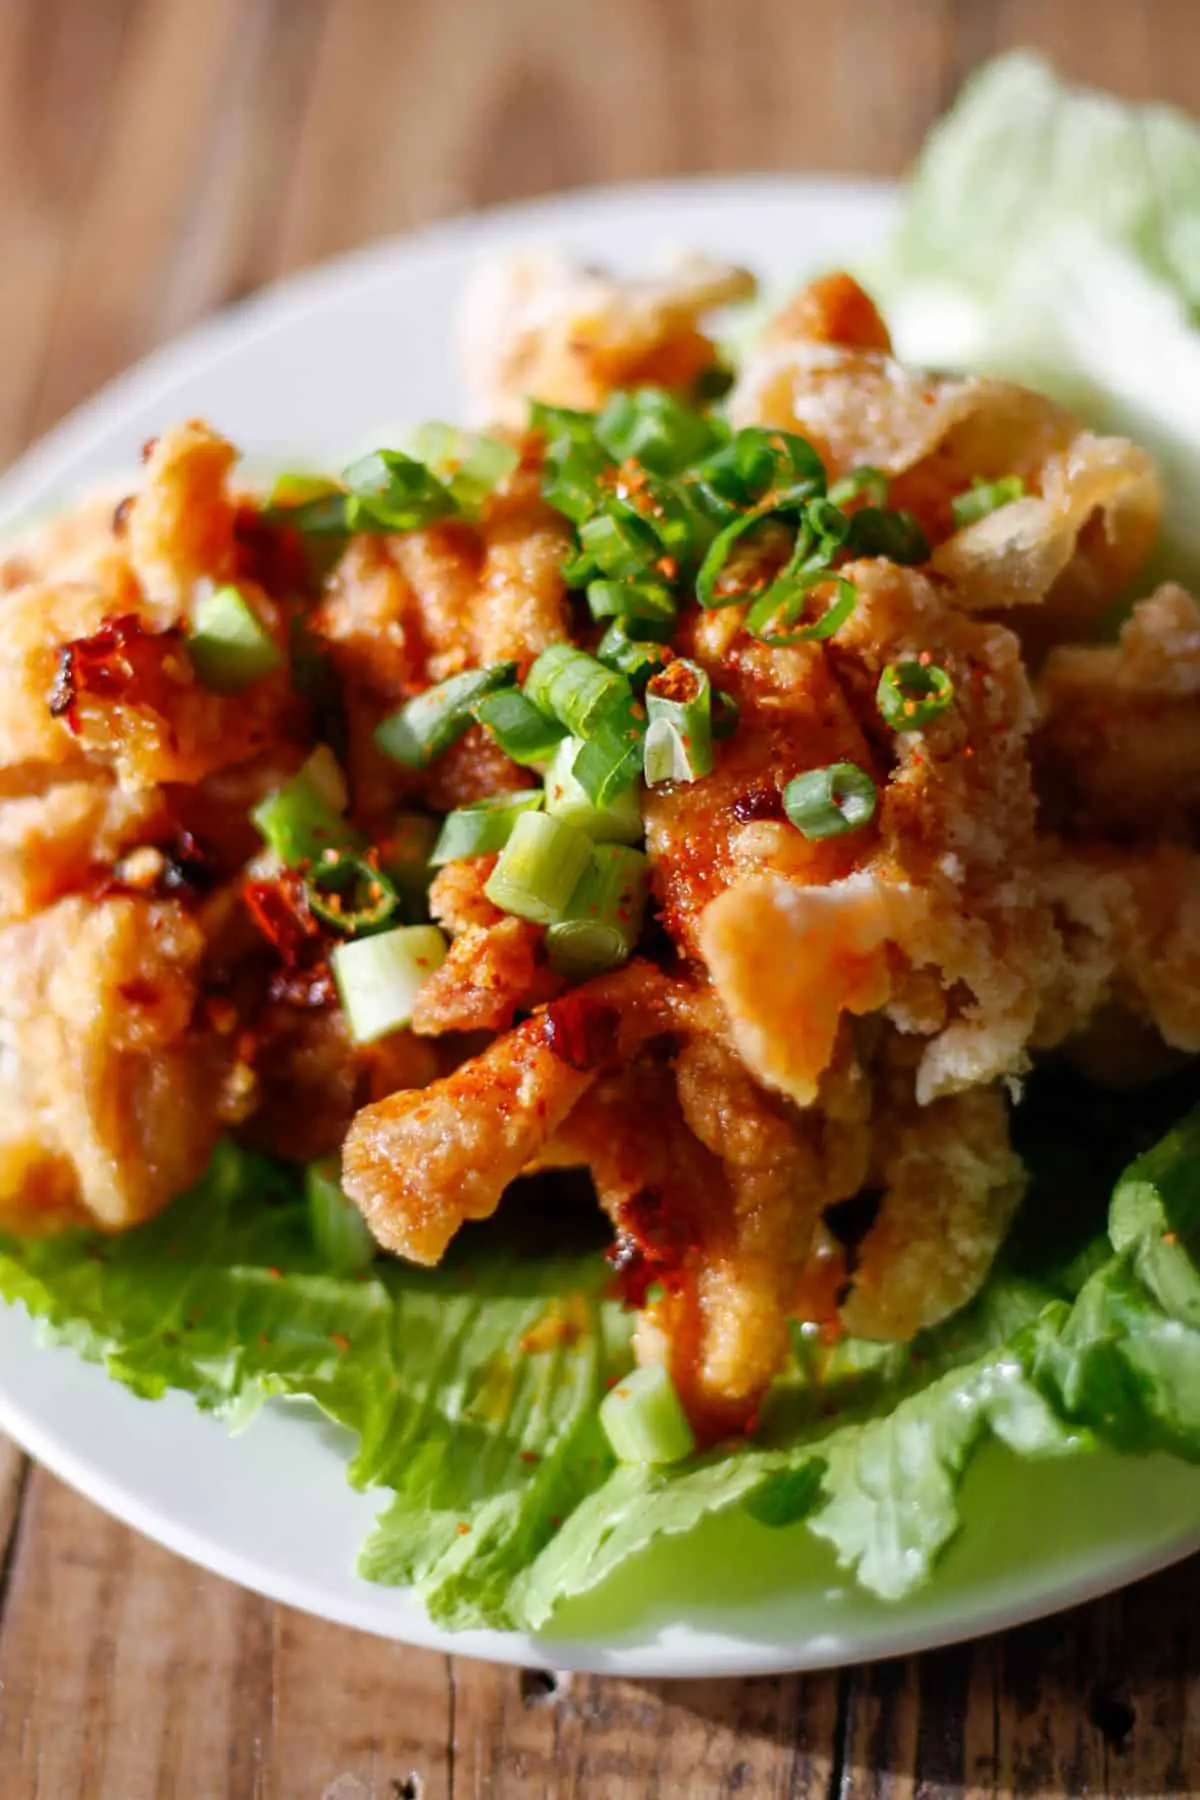 Pieces of fried chicken atop iceberg lettuce drizzled with a soy based sauce and topped with sliced green onions on a white plate.